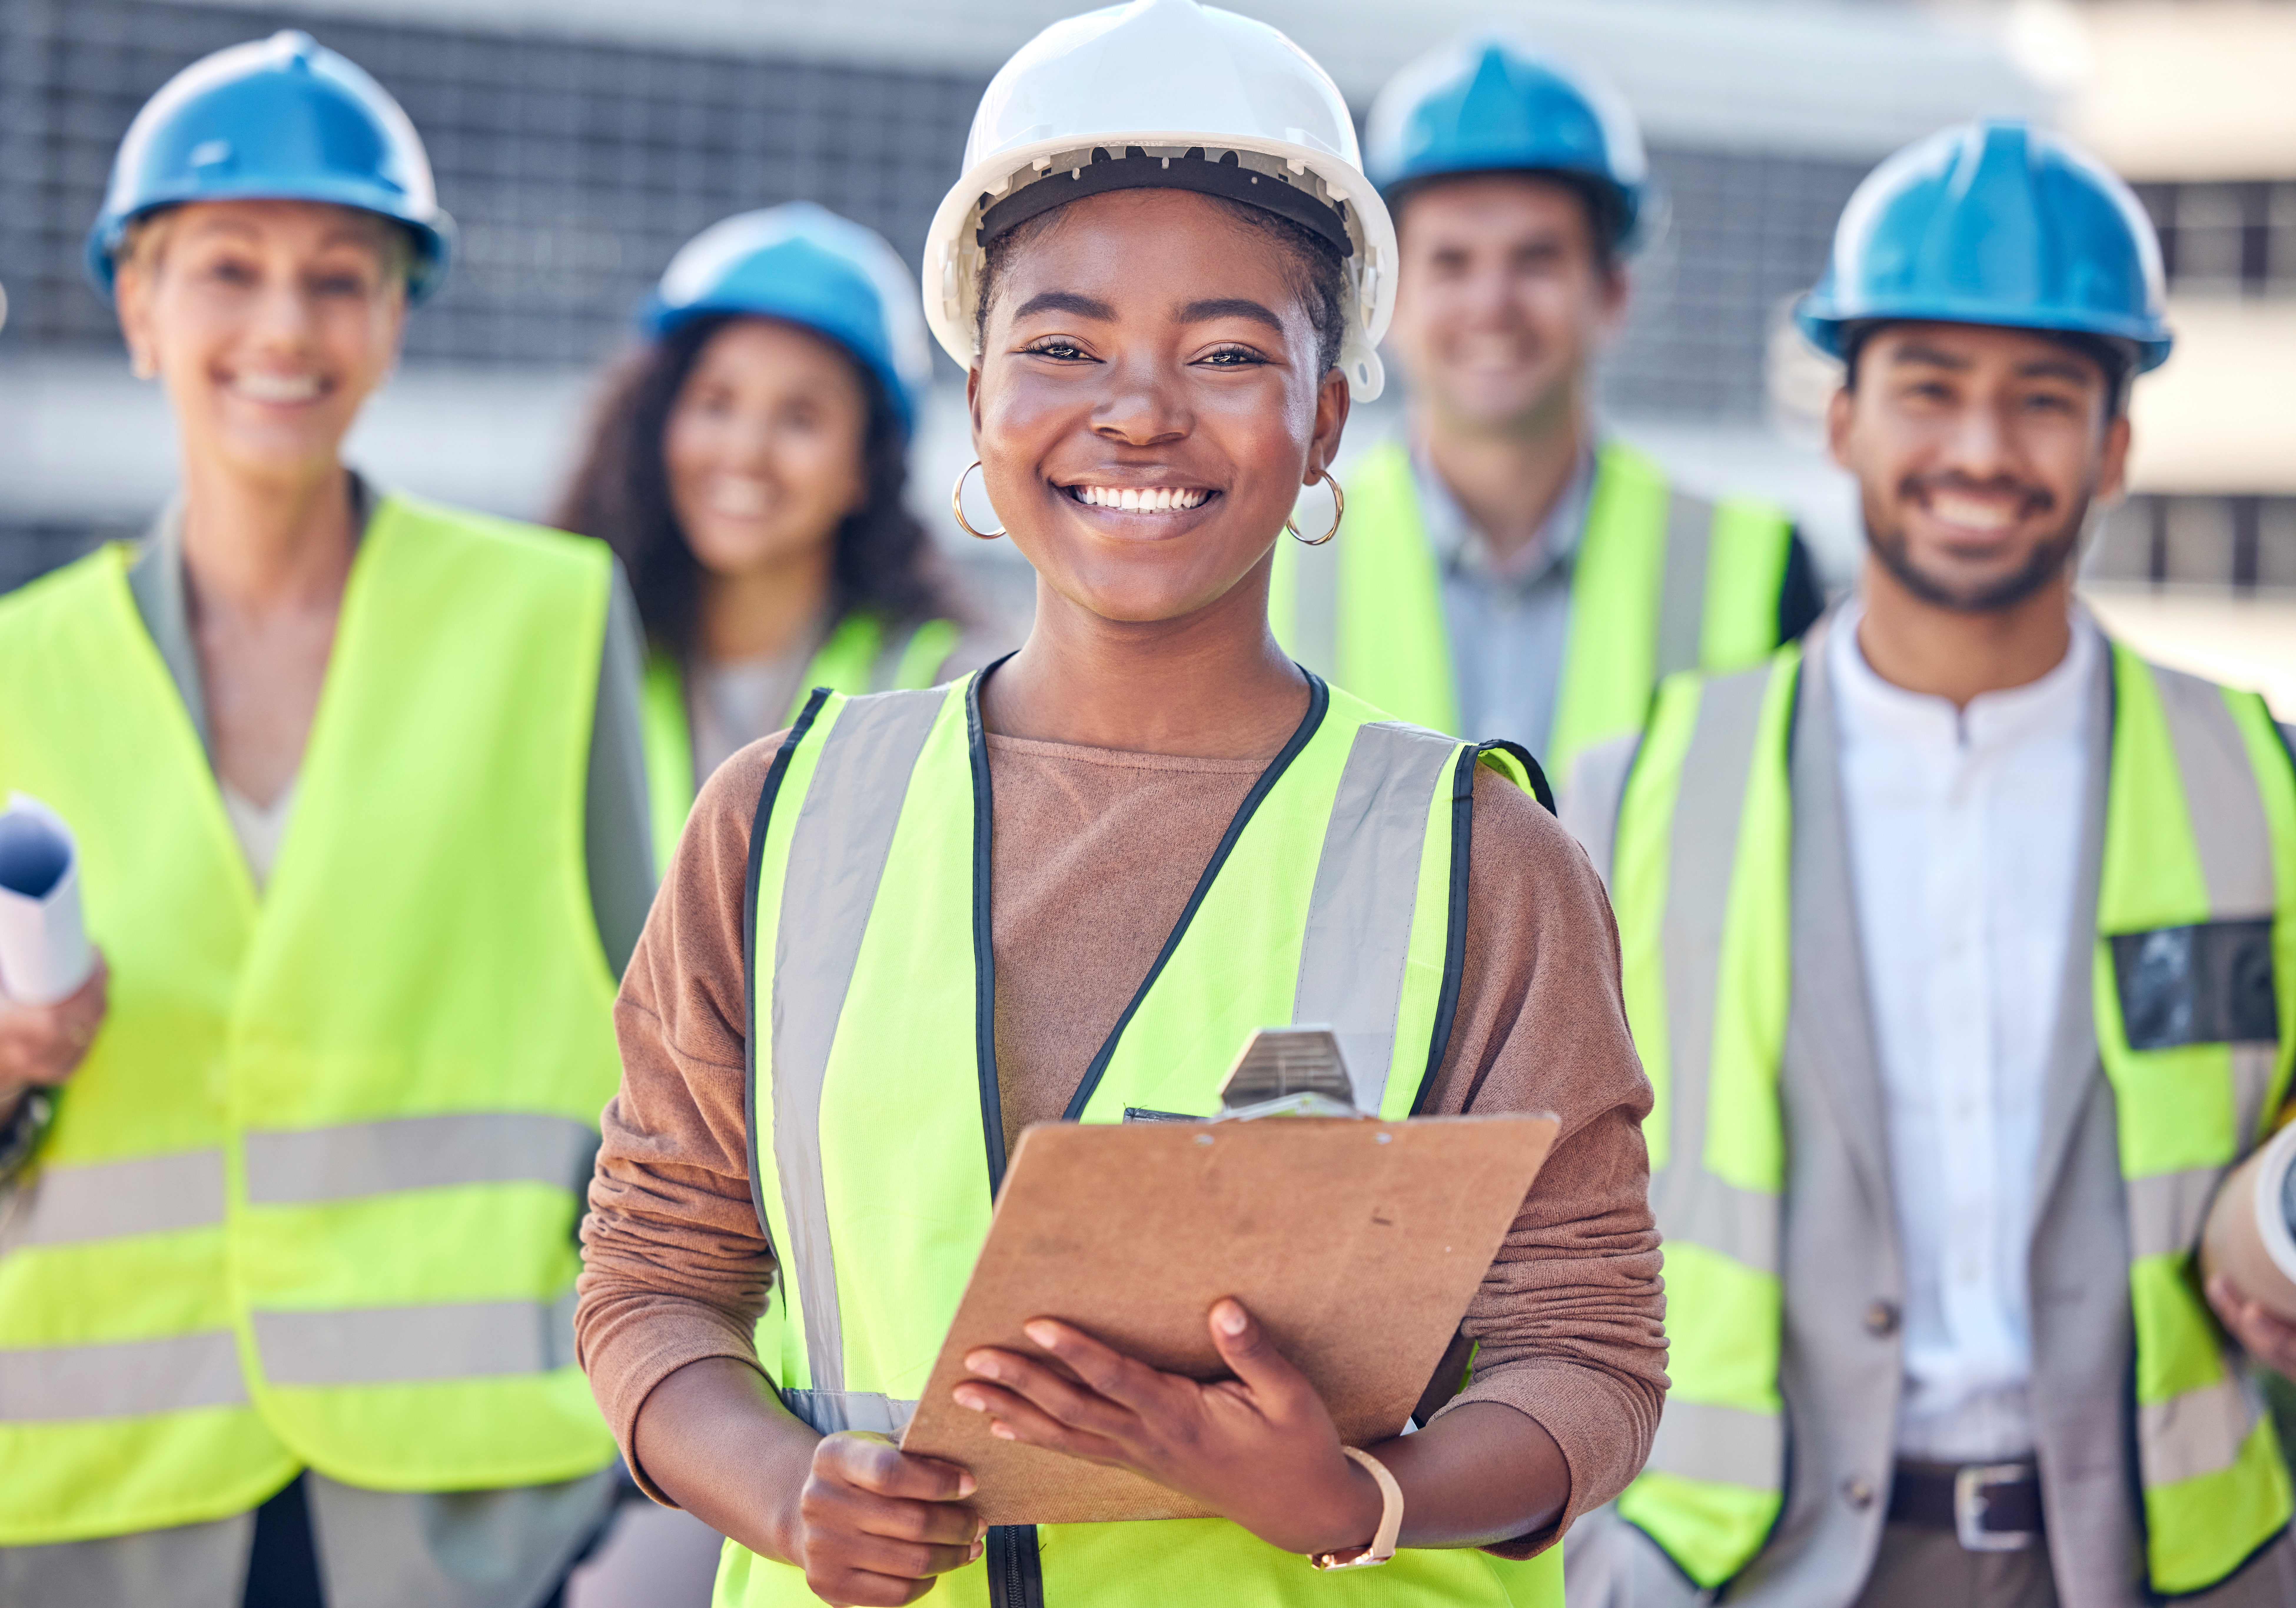 Construction worker holding clipboard and standing on building site with her colleagues in the background